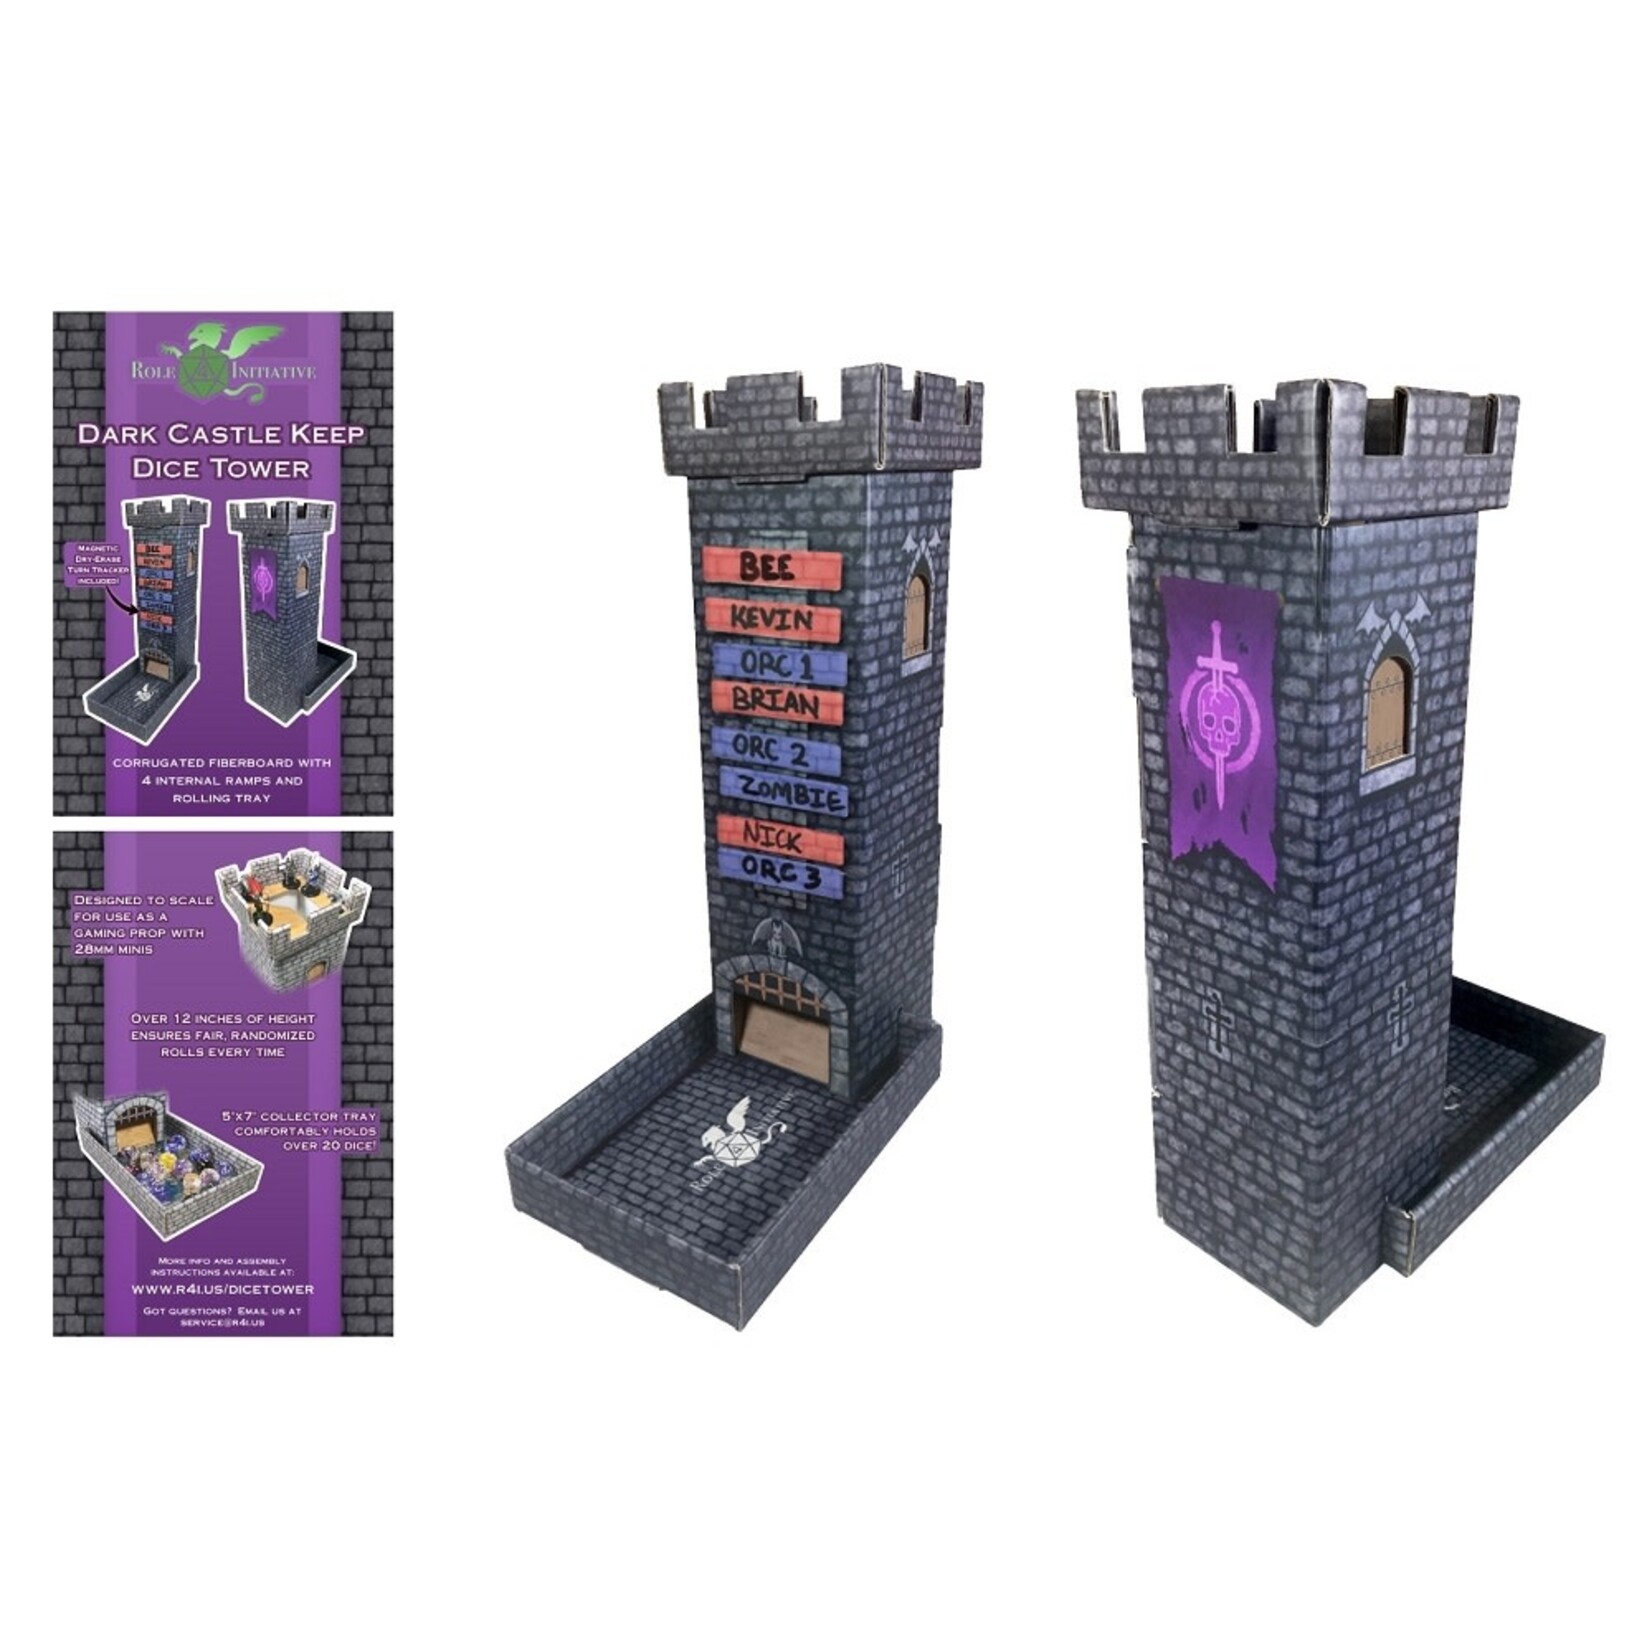 Role 4 Initiative Dice Tower and Turn Tracker Castle Keep